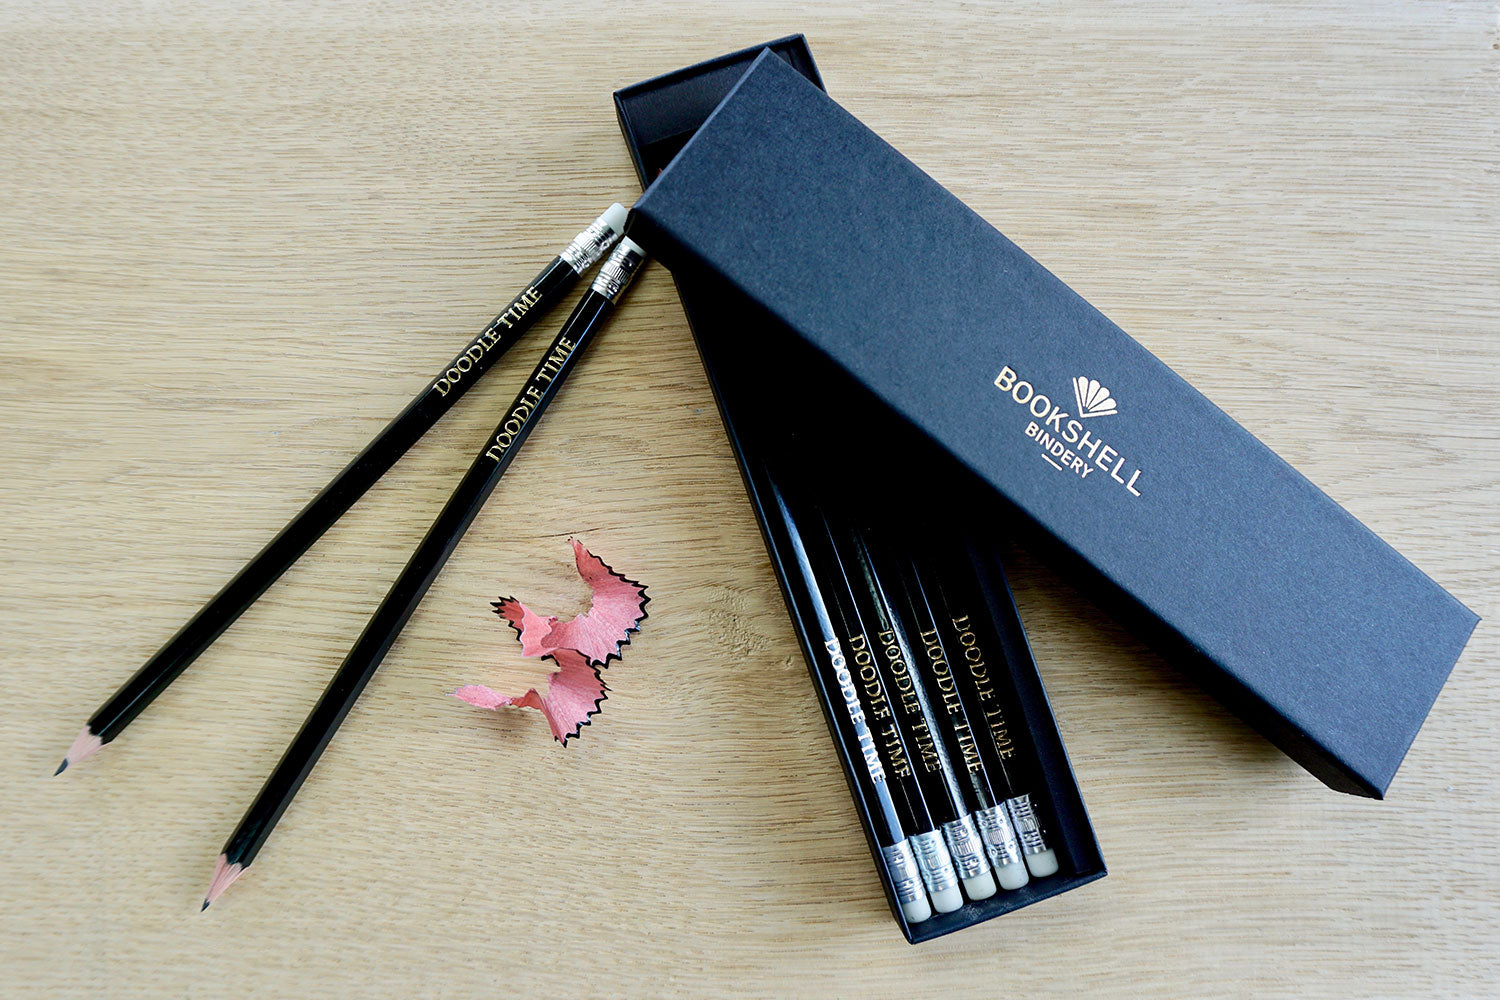 Customized pencils from Bookshell